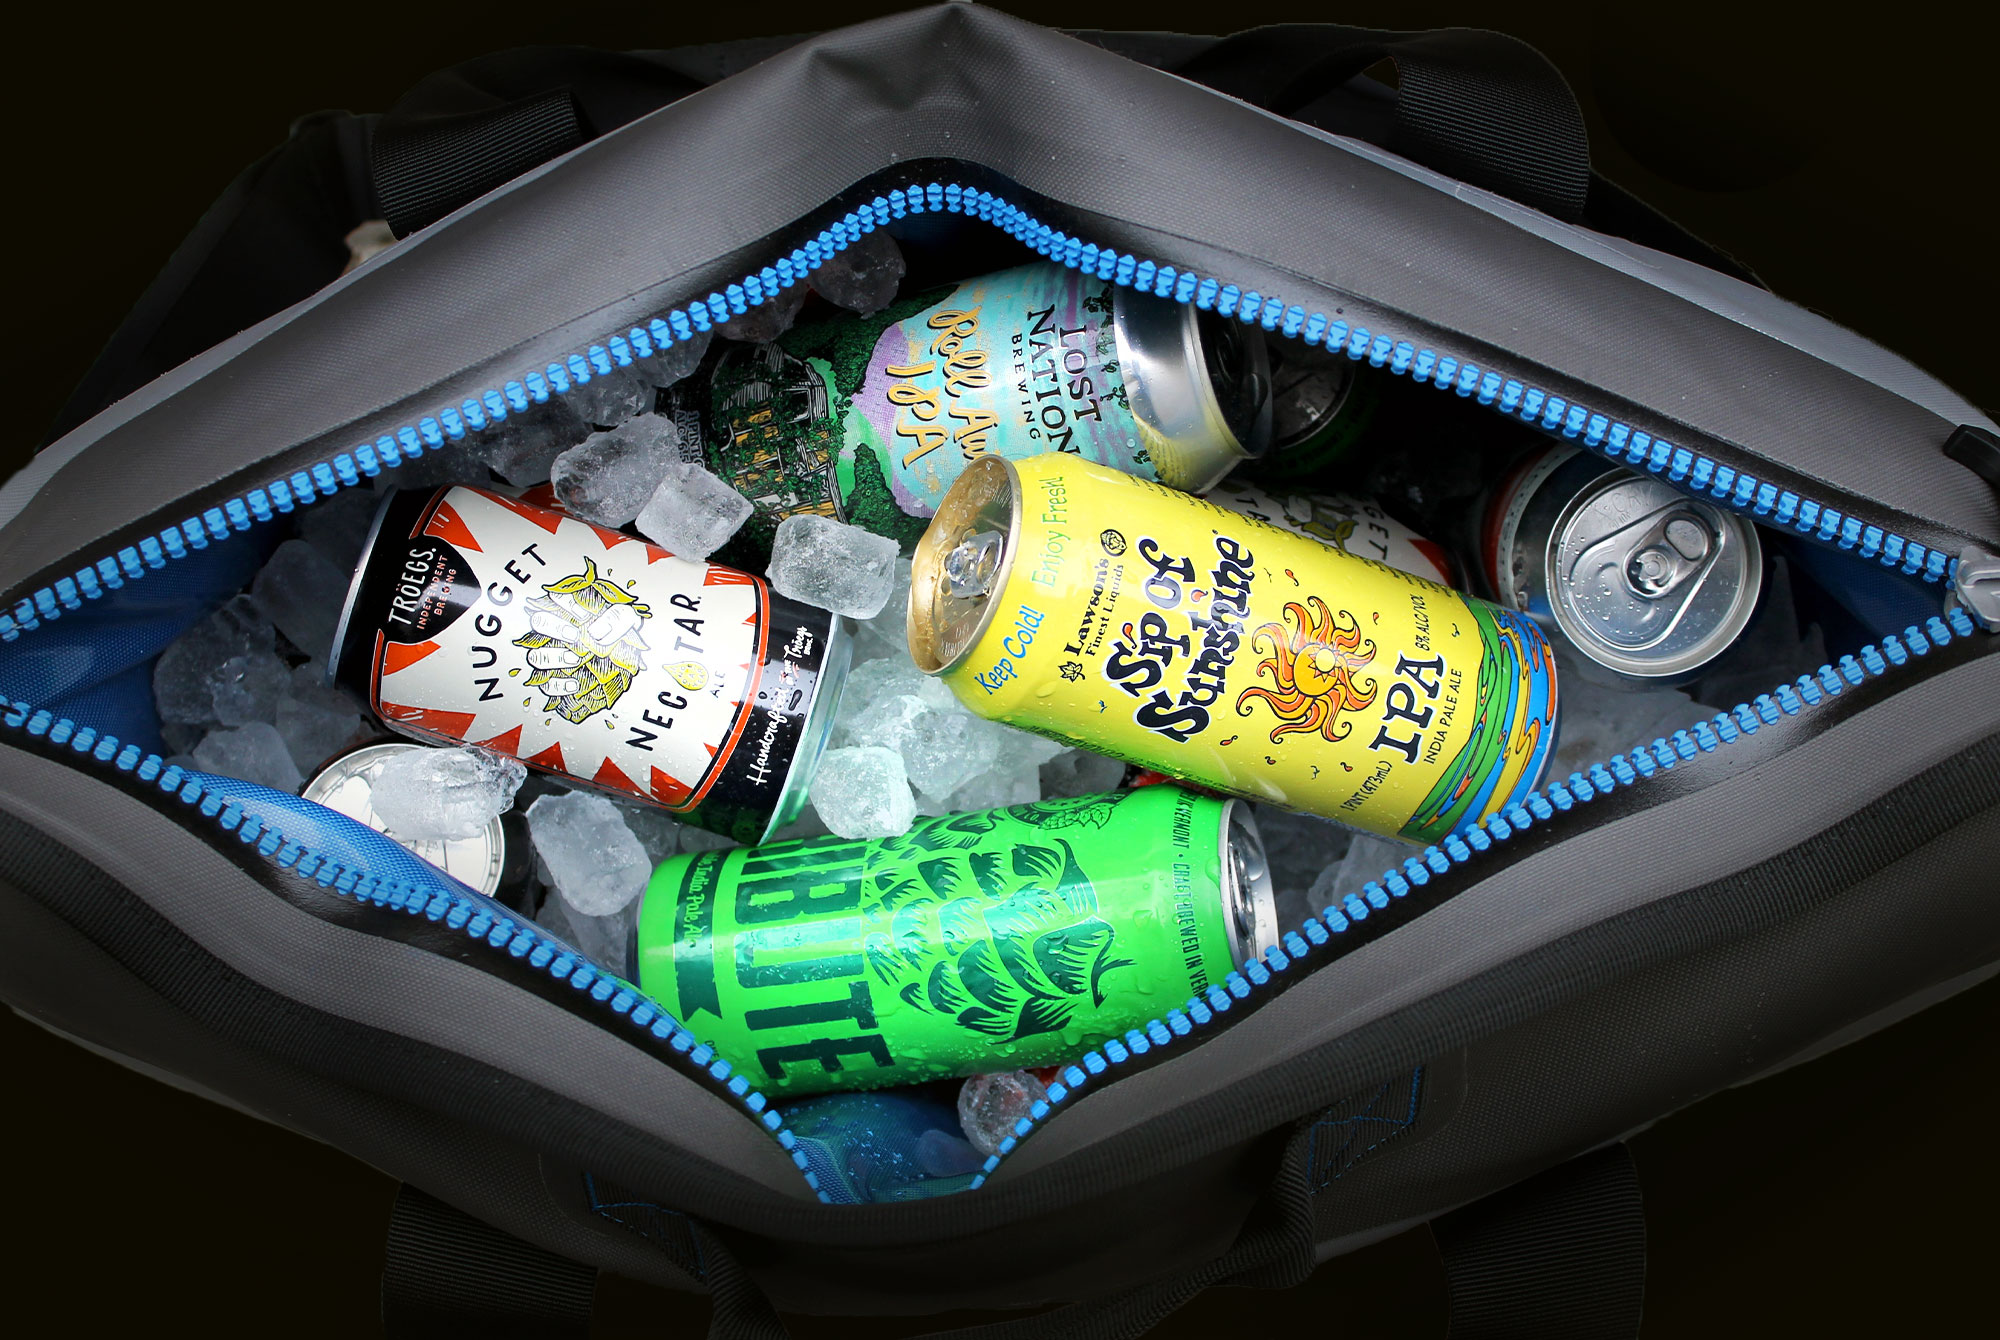 I Spent 6 Weeks Trying to Hate the Yeti Cooler